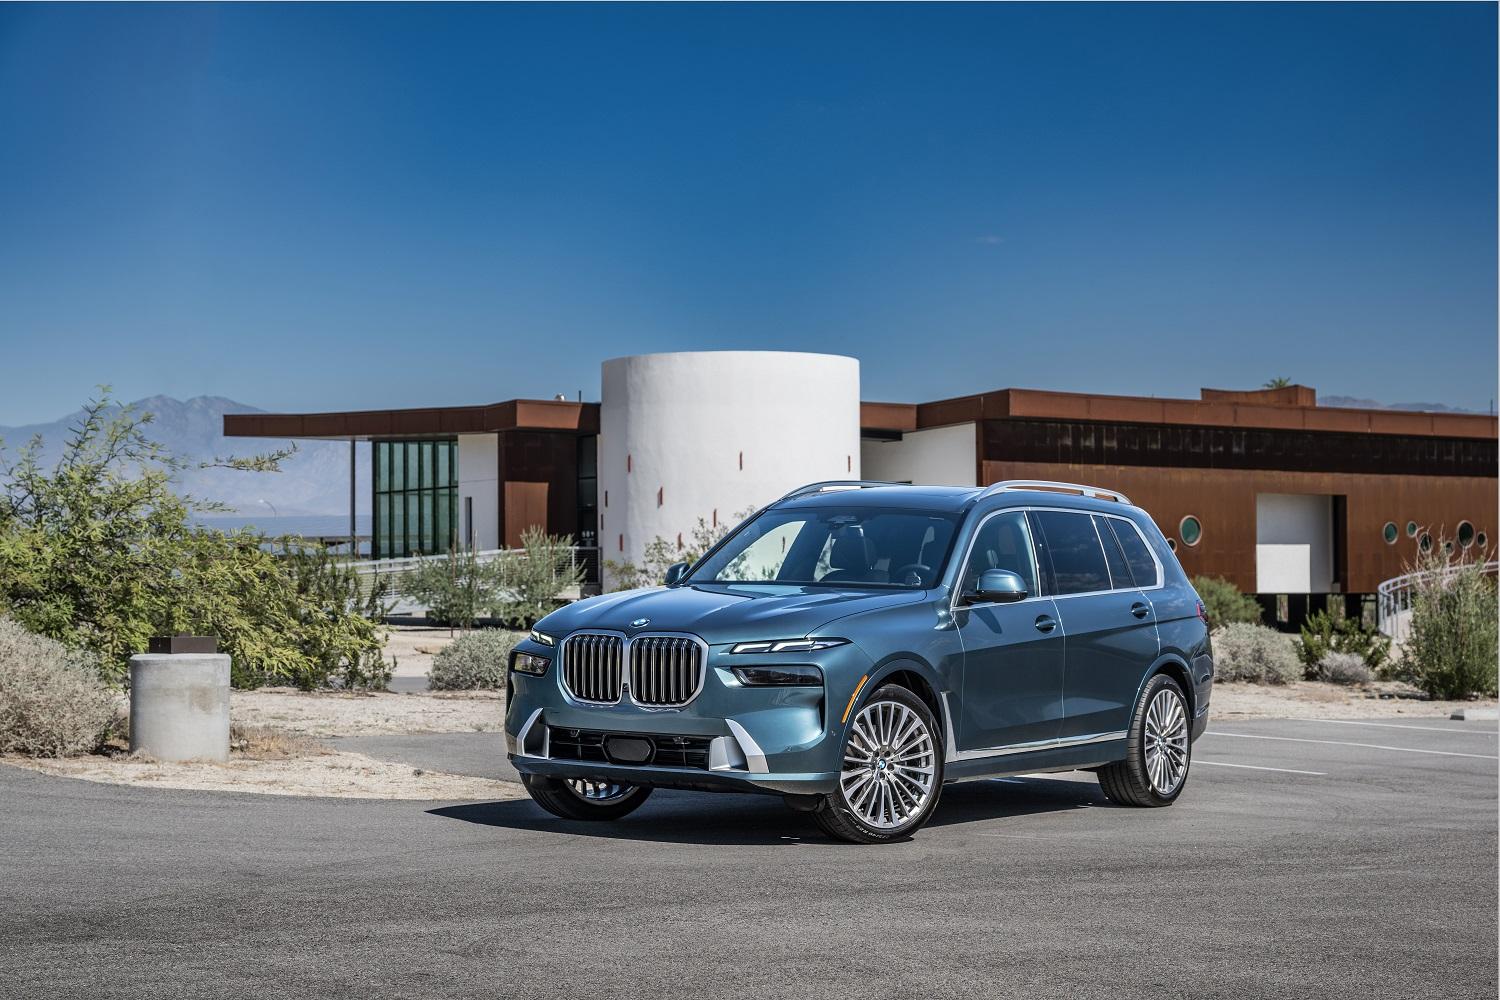 P90486496 highRes the new bmw x7 on lo BMW X7